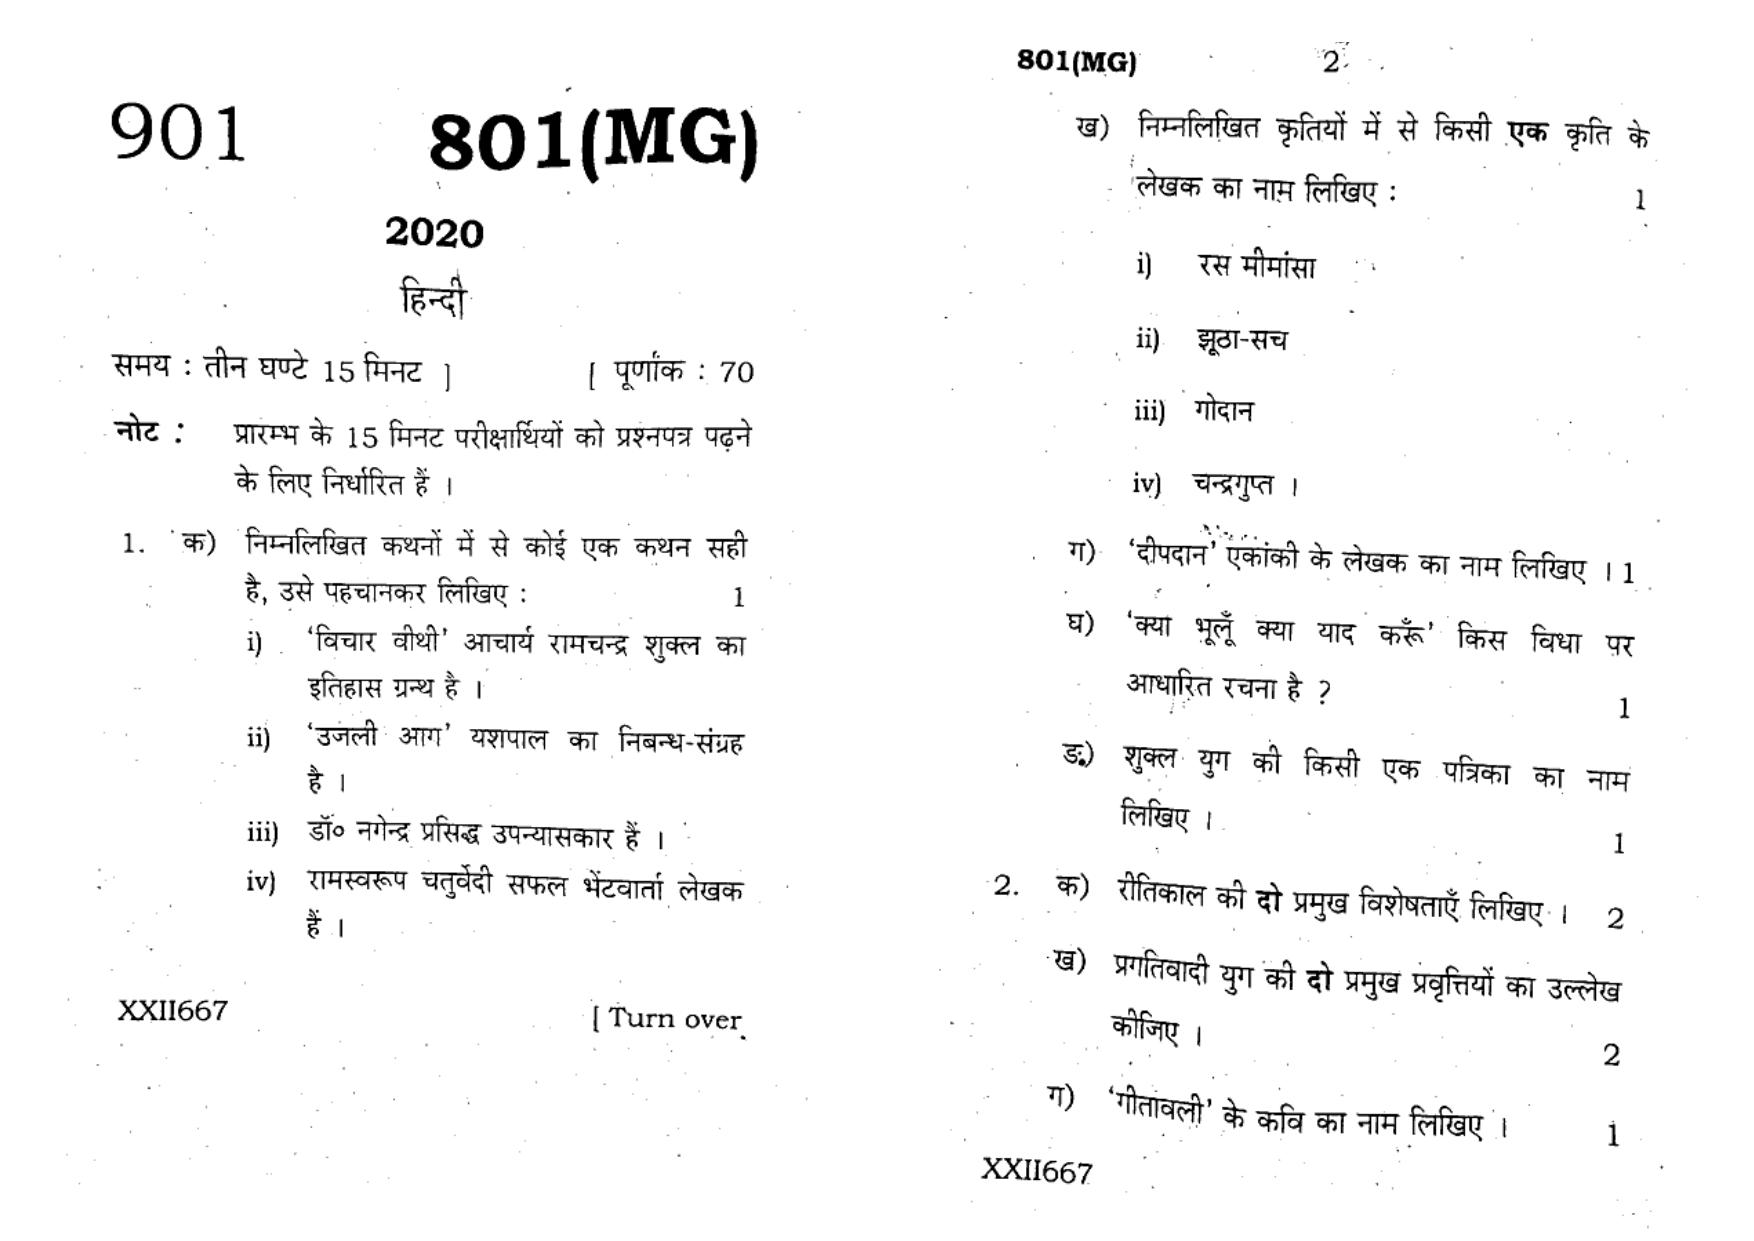 UP Board Previous Year Question Paper Class 10 Hindi (801 MG) – 2020 - Page 1